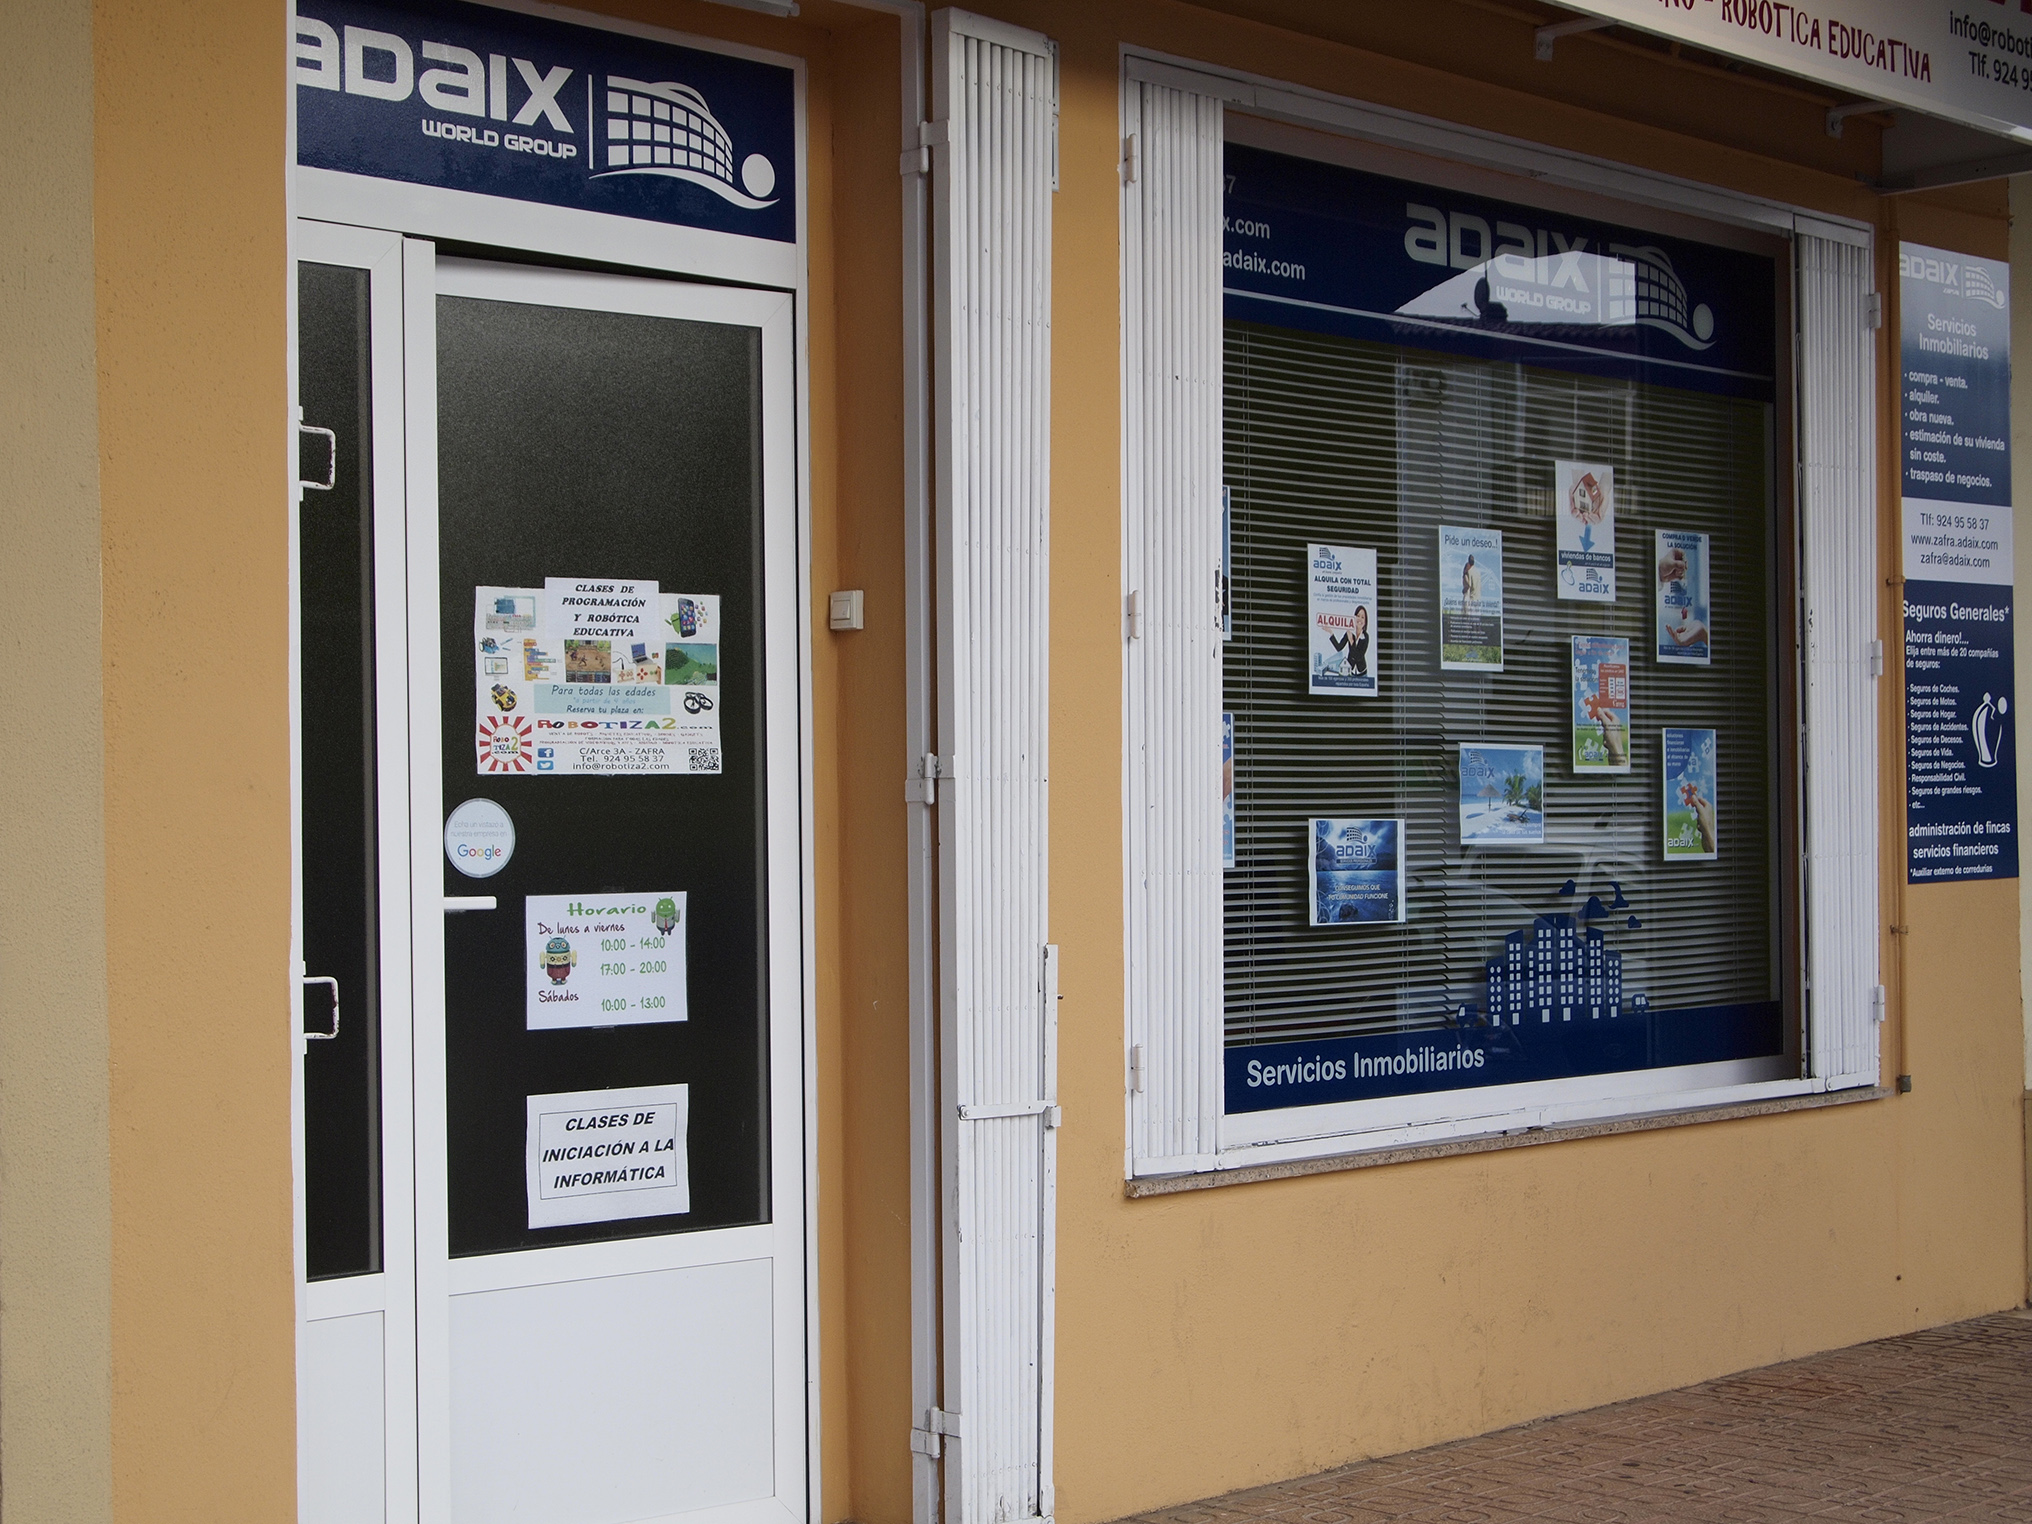 Opening of a new agency Adaix in the town of Zafra (Badajoz)